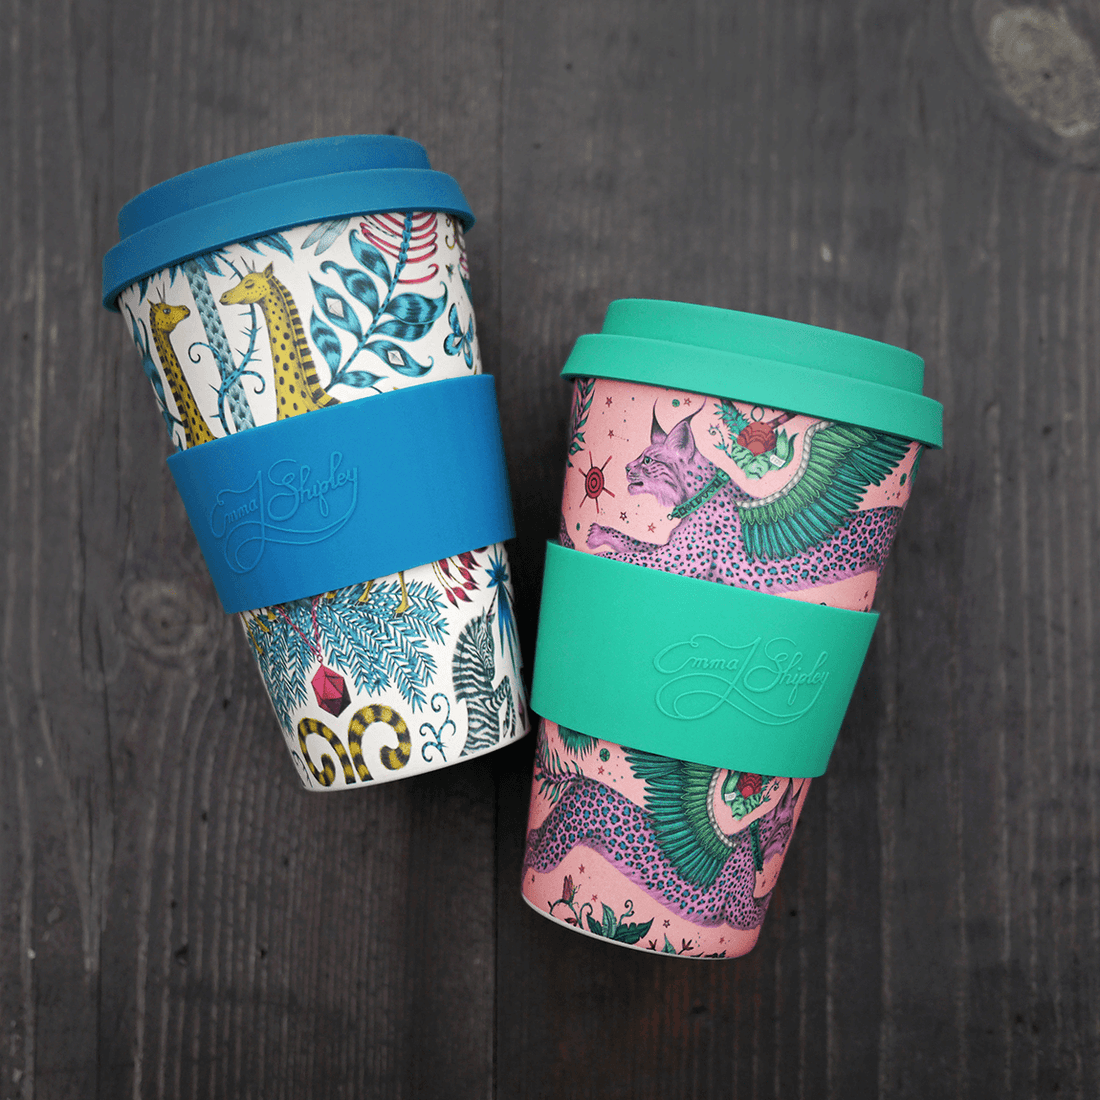 Ecoffee, Ecoffee Cup Reusable Bamboo Travel Cup 0.4l / 14 oz. - Emma J. Shipley: Kruger, Redber Coffee